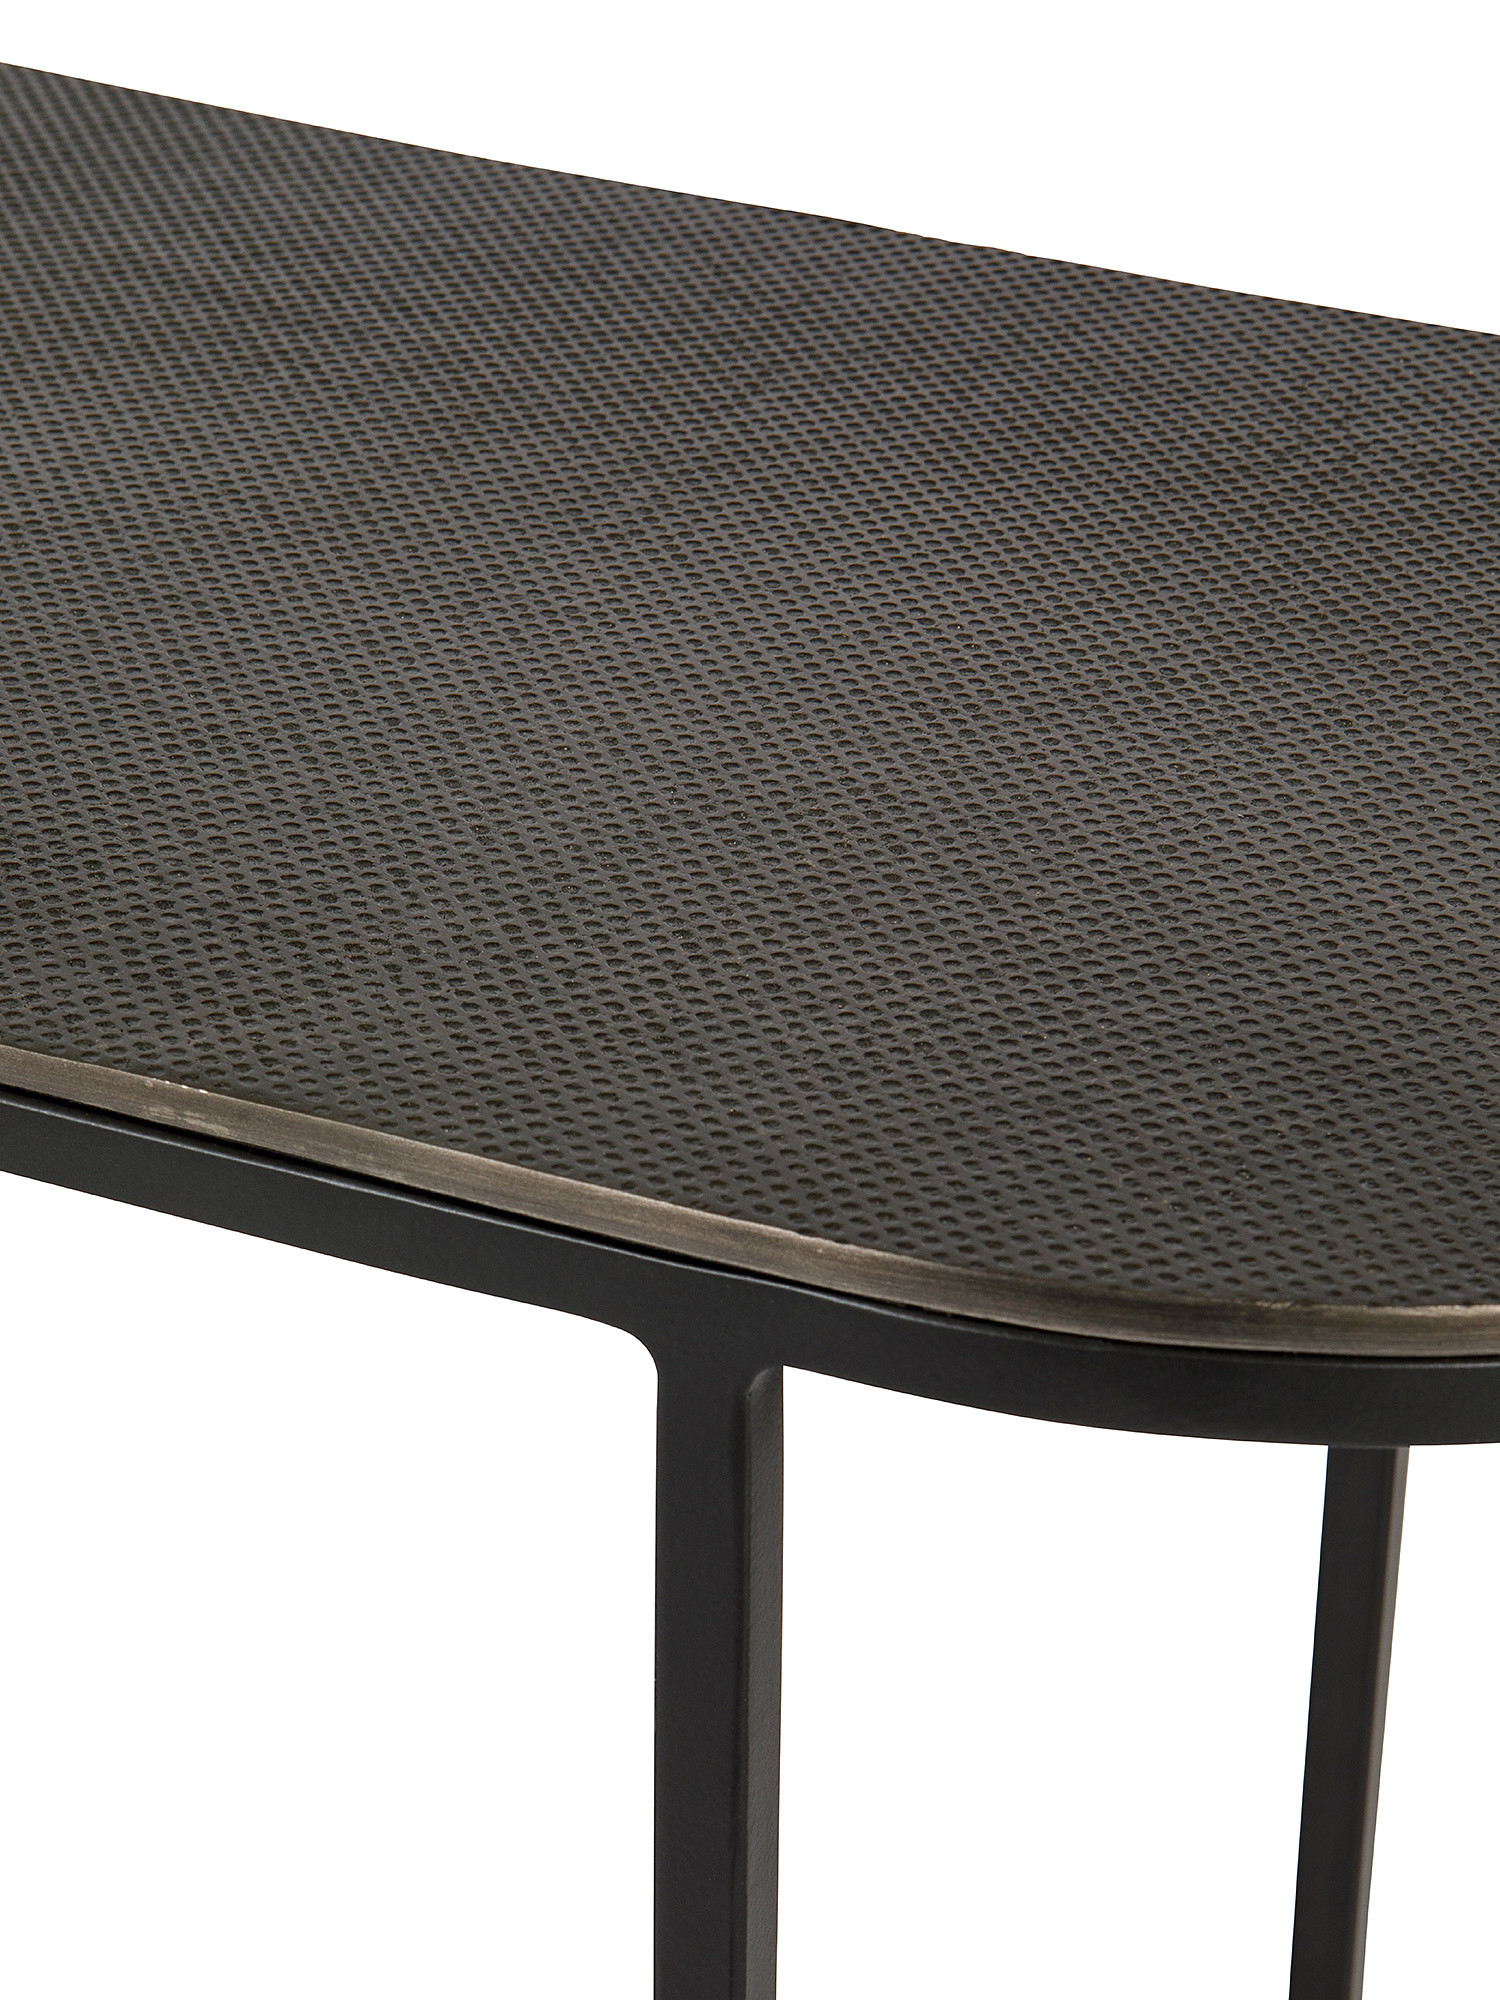 Graphite graphite effect console, Grey, large image number 2